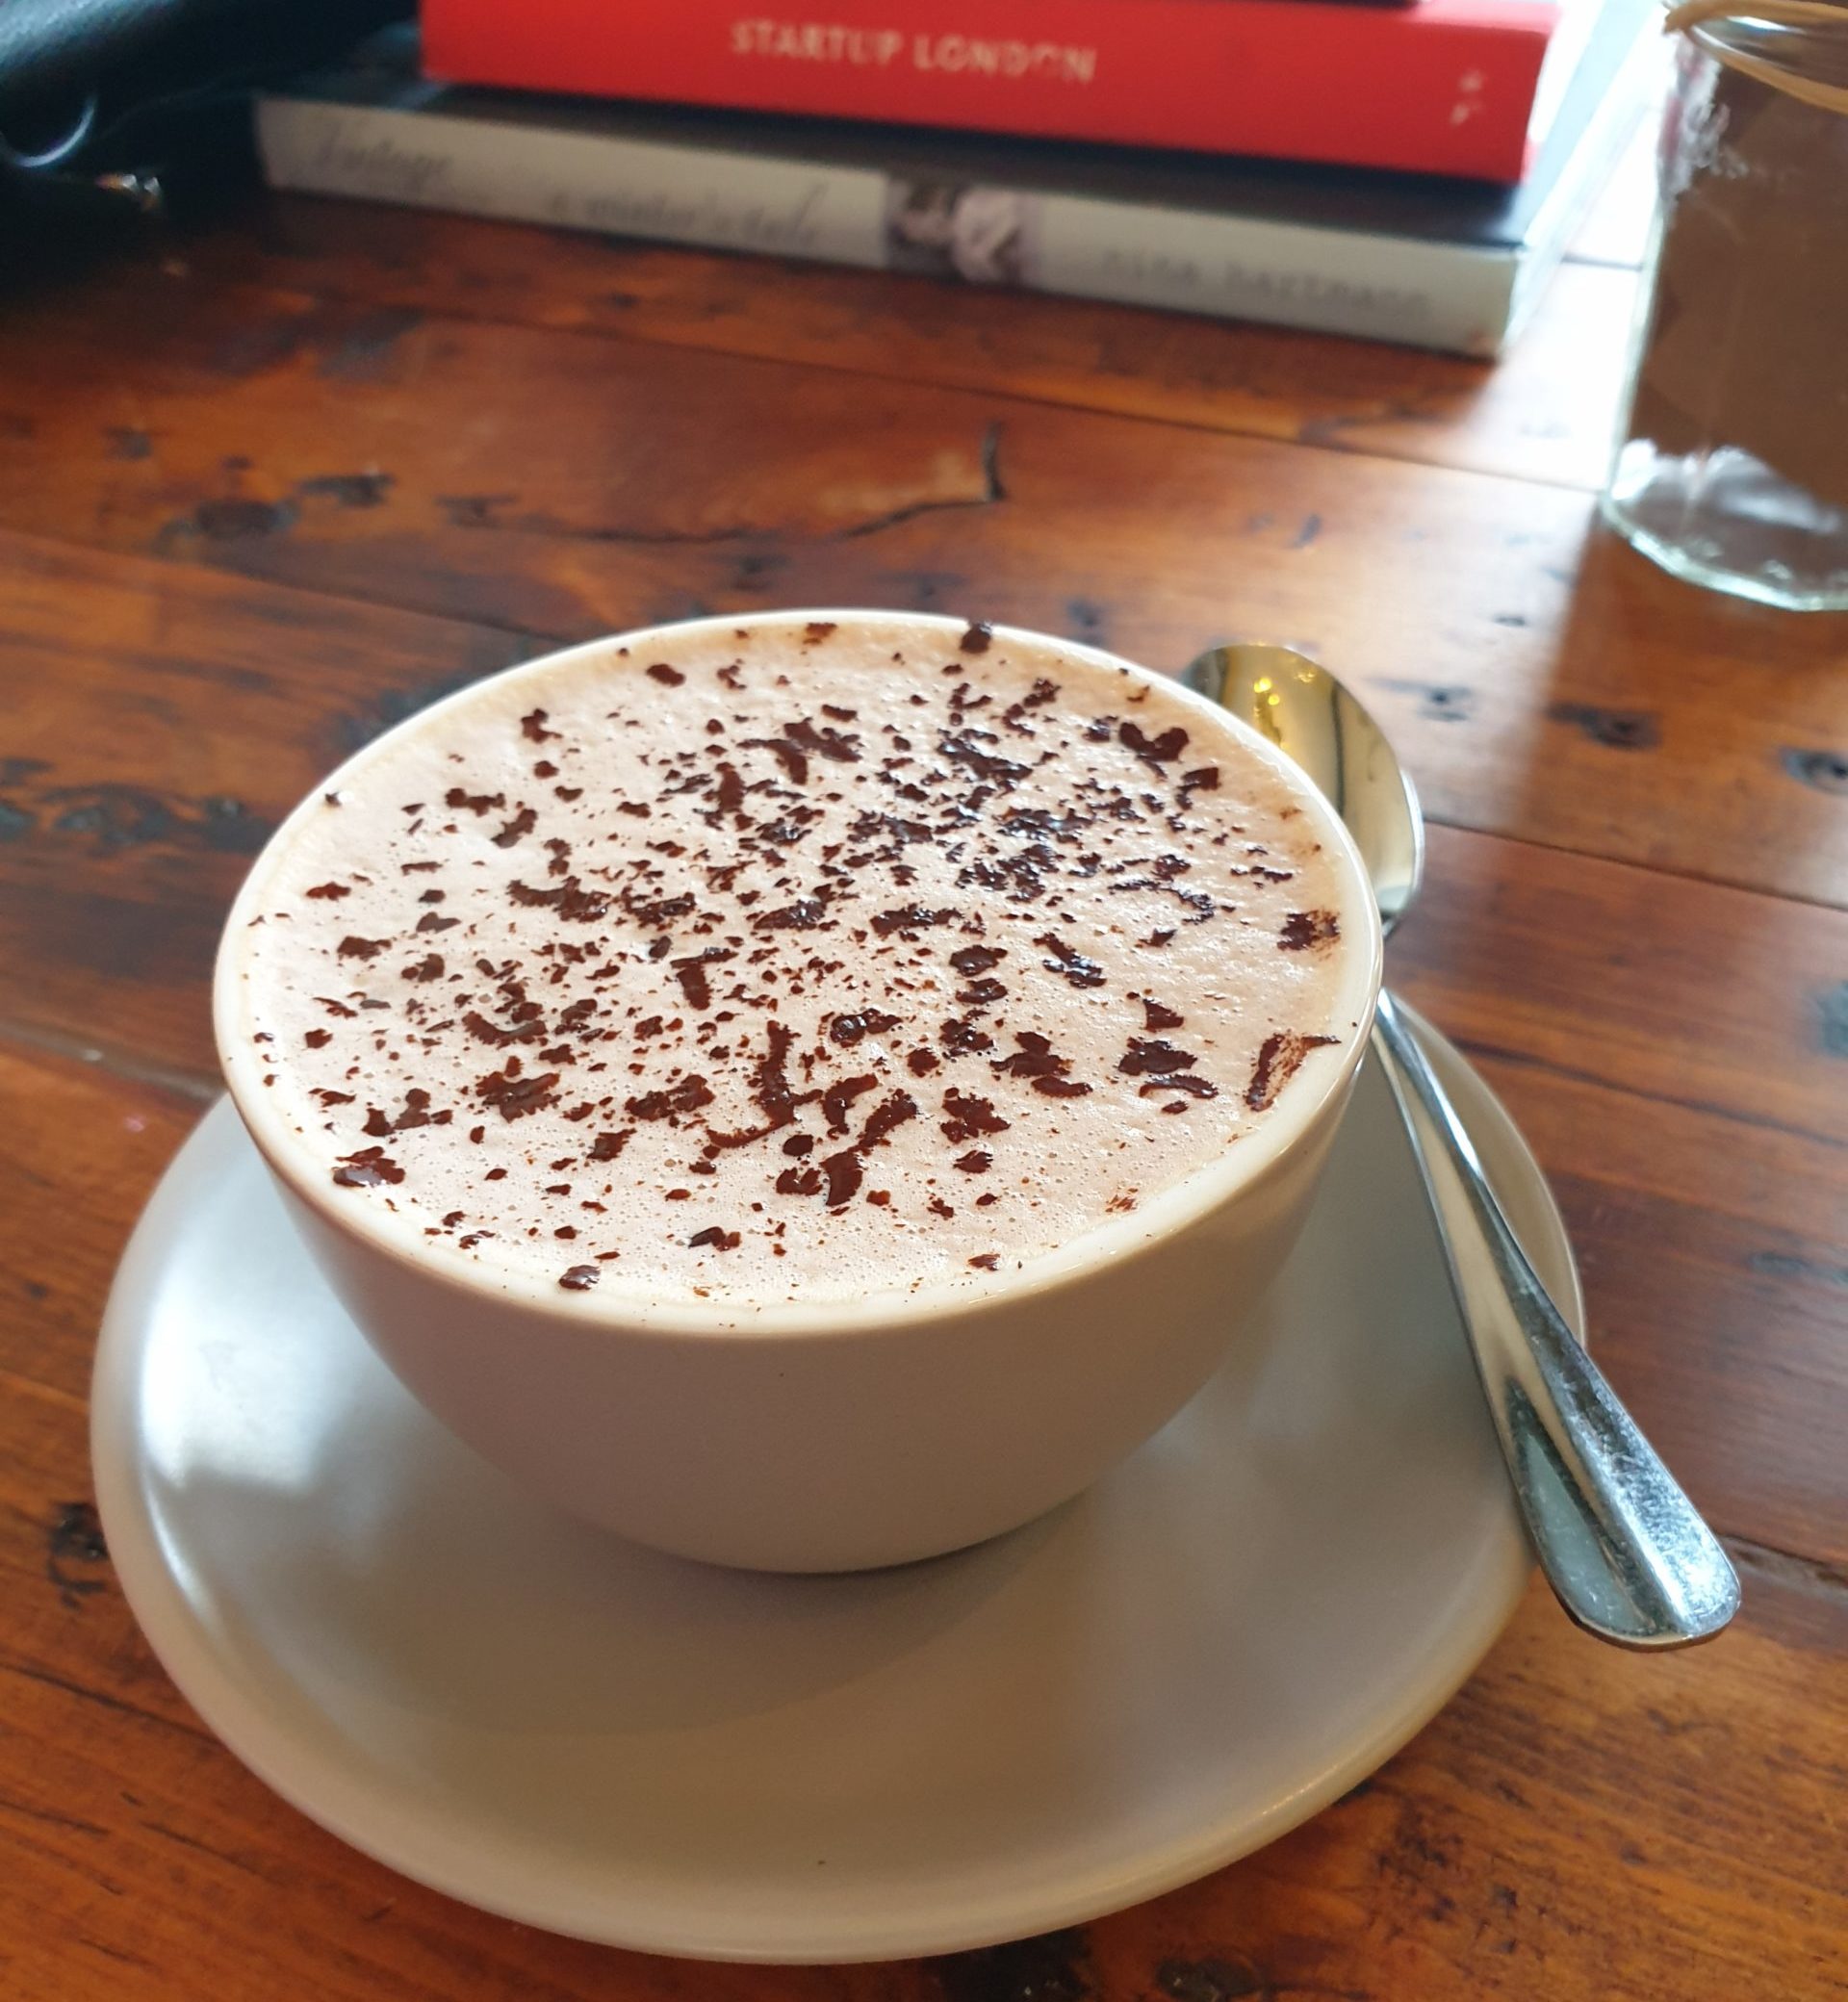 Hot Chocolate at the Green Room, Ipswich